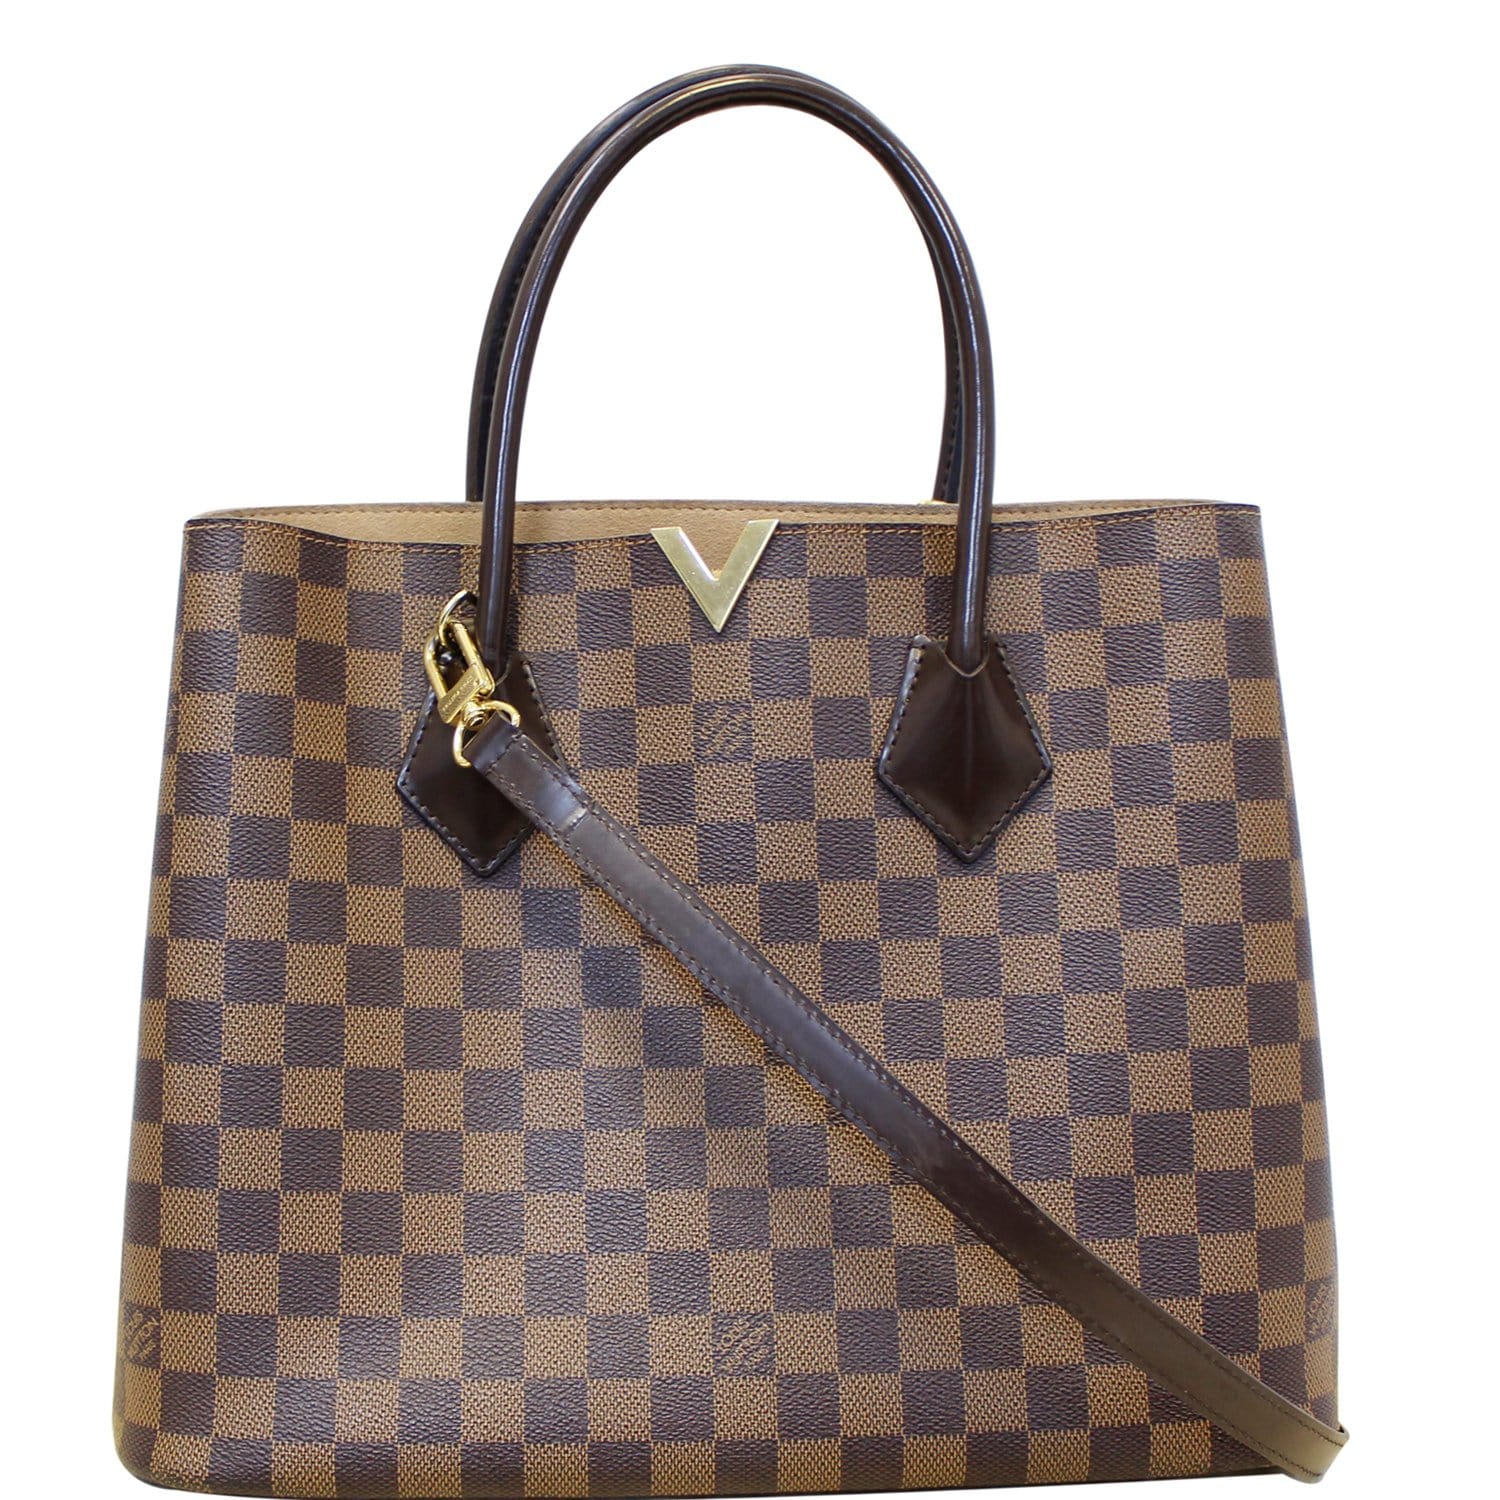 Snooty Fox on Instagram: Louis Vuitton Damier Kensington Handbag … $1349  ♦️SOLD♦️ This bag is available at the Harpers Pt location … 513-489-2434.  This item has been authenticated via Entrupy. Call with